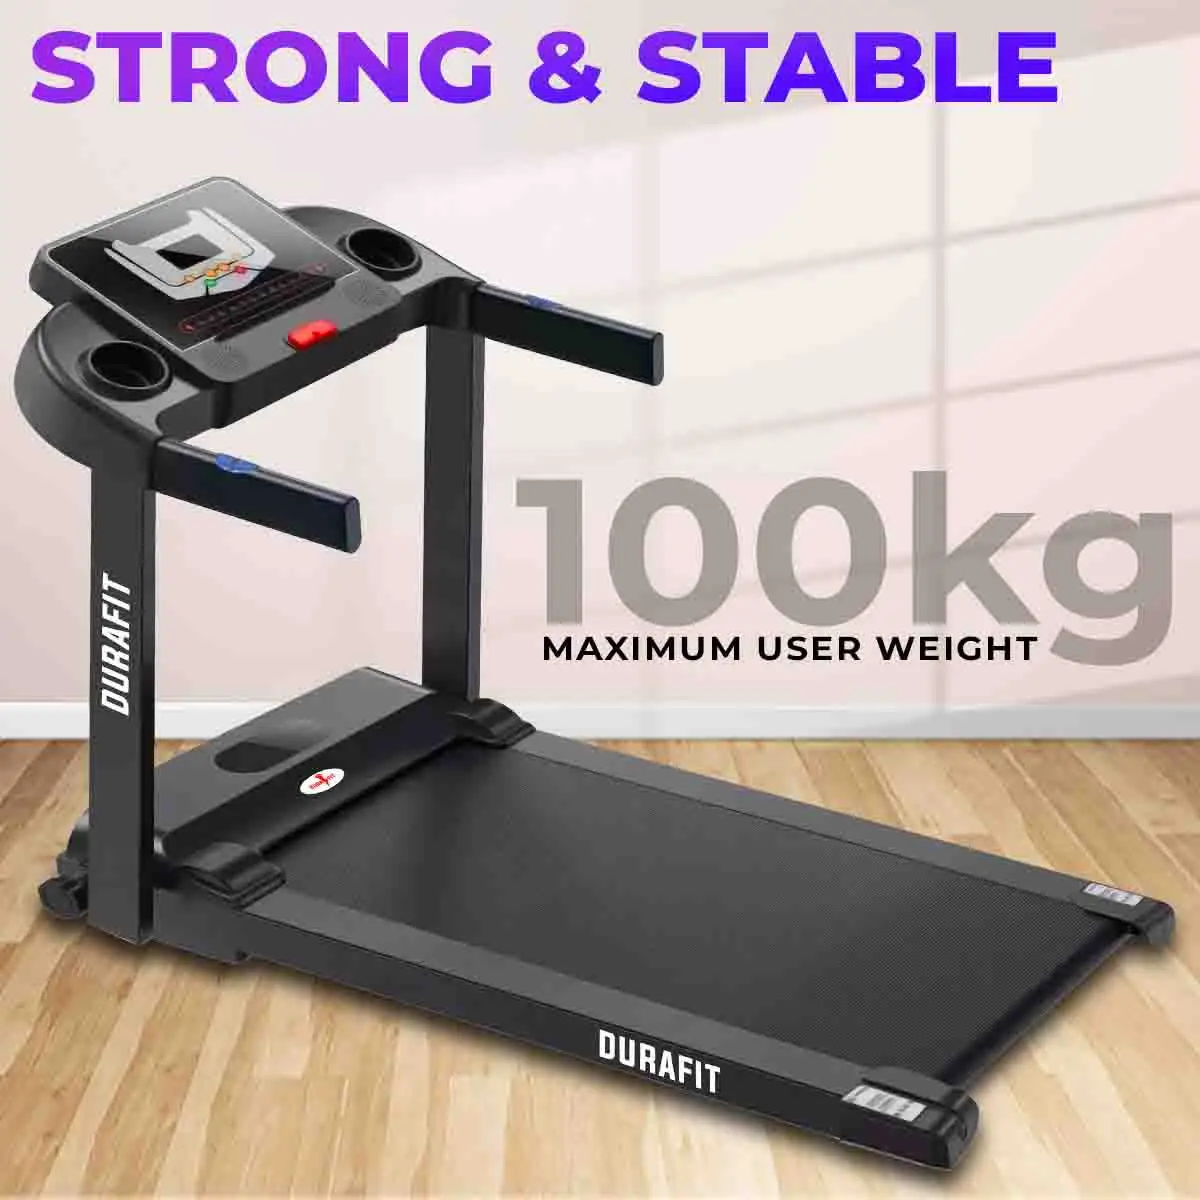 Durafit Spark Treadmill with Max User Weight 100kg